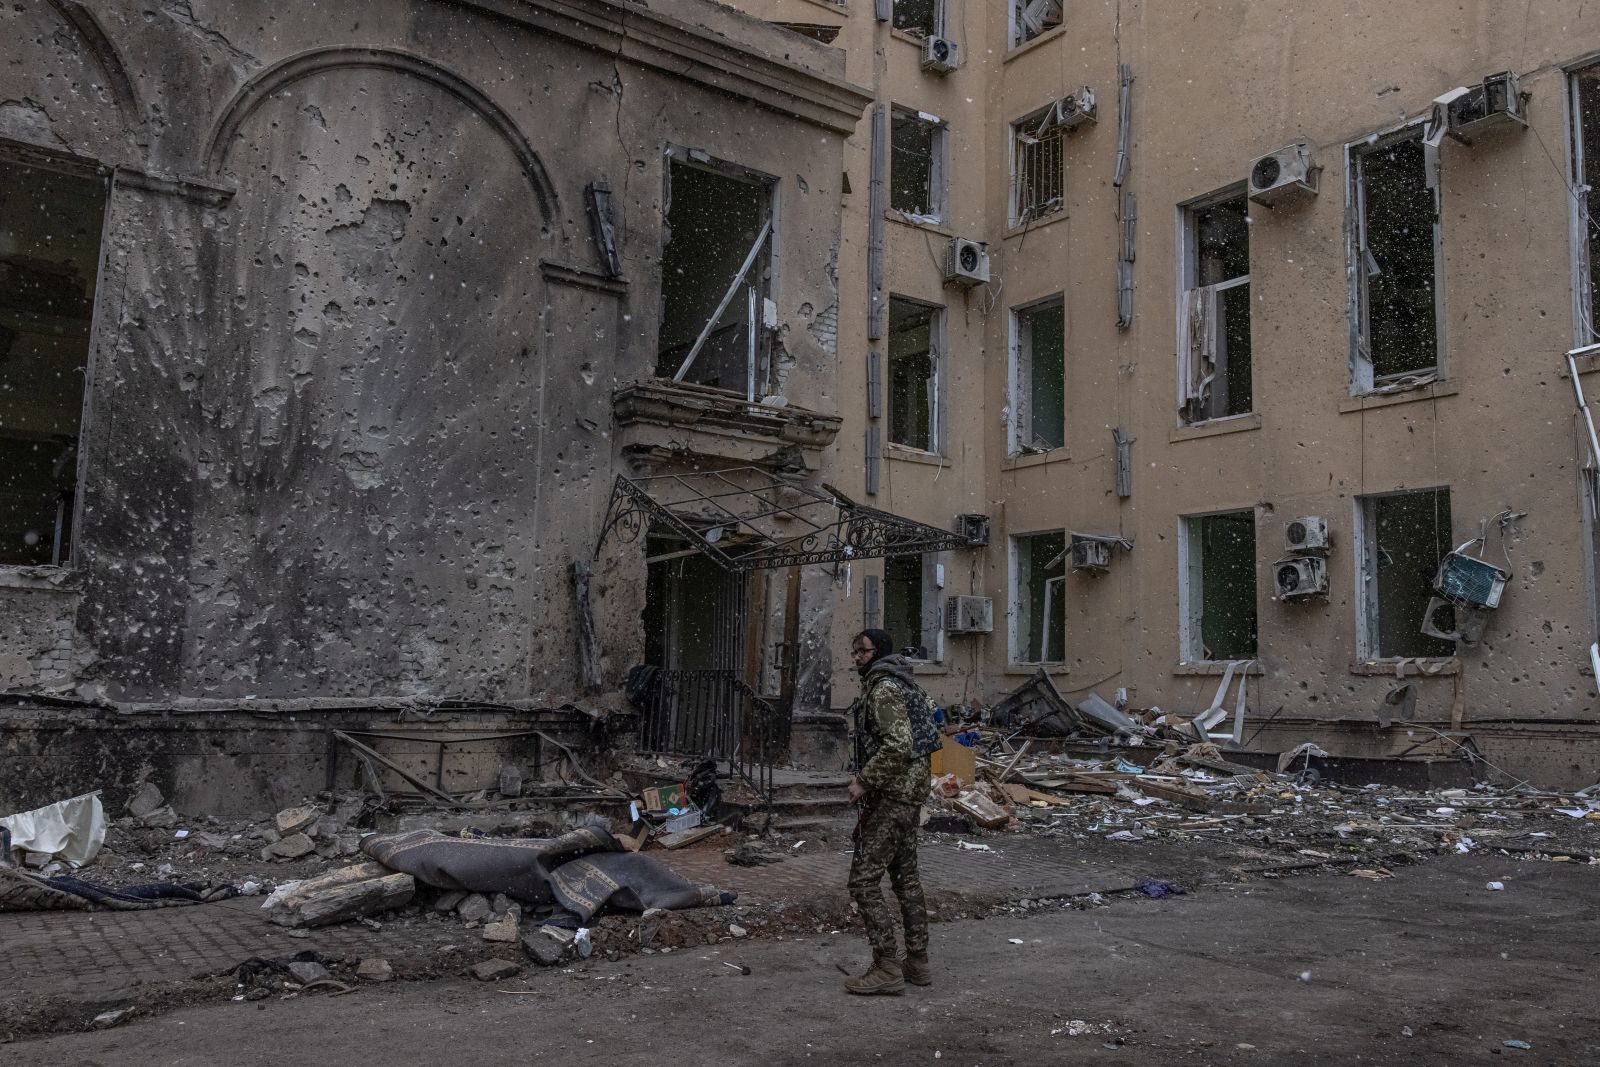 epa09853210 A member of the Ukrainian military stands next to the damaged building of Kharkiv Regional State Administration, that was heavily shelled by Russian forces, in Kharkiv, northeast Ukraine, 27 March 2022. The building was heavily shelled on 01 March, and the searching operation for victims is still going on. The bodies of 24 people have been found under the rubble, according to the information provided by Ukrainian State Emergency Service. Kharkiv, Ukraine’s second-largest city of 1.5 million people, which lies about 25 miles from the Russian border, has been heavily shelled by Russian forces over the past weeks, with many civilians killed in the city.  EPA/ROMAN PILIPEY